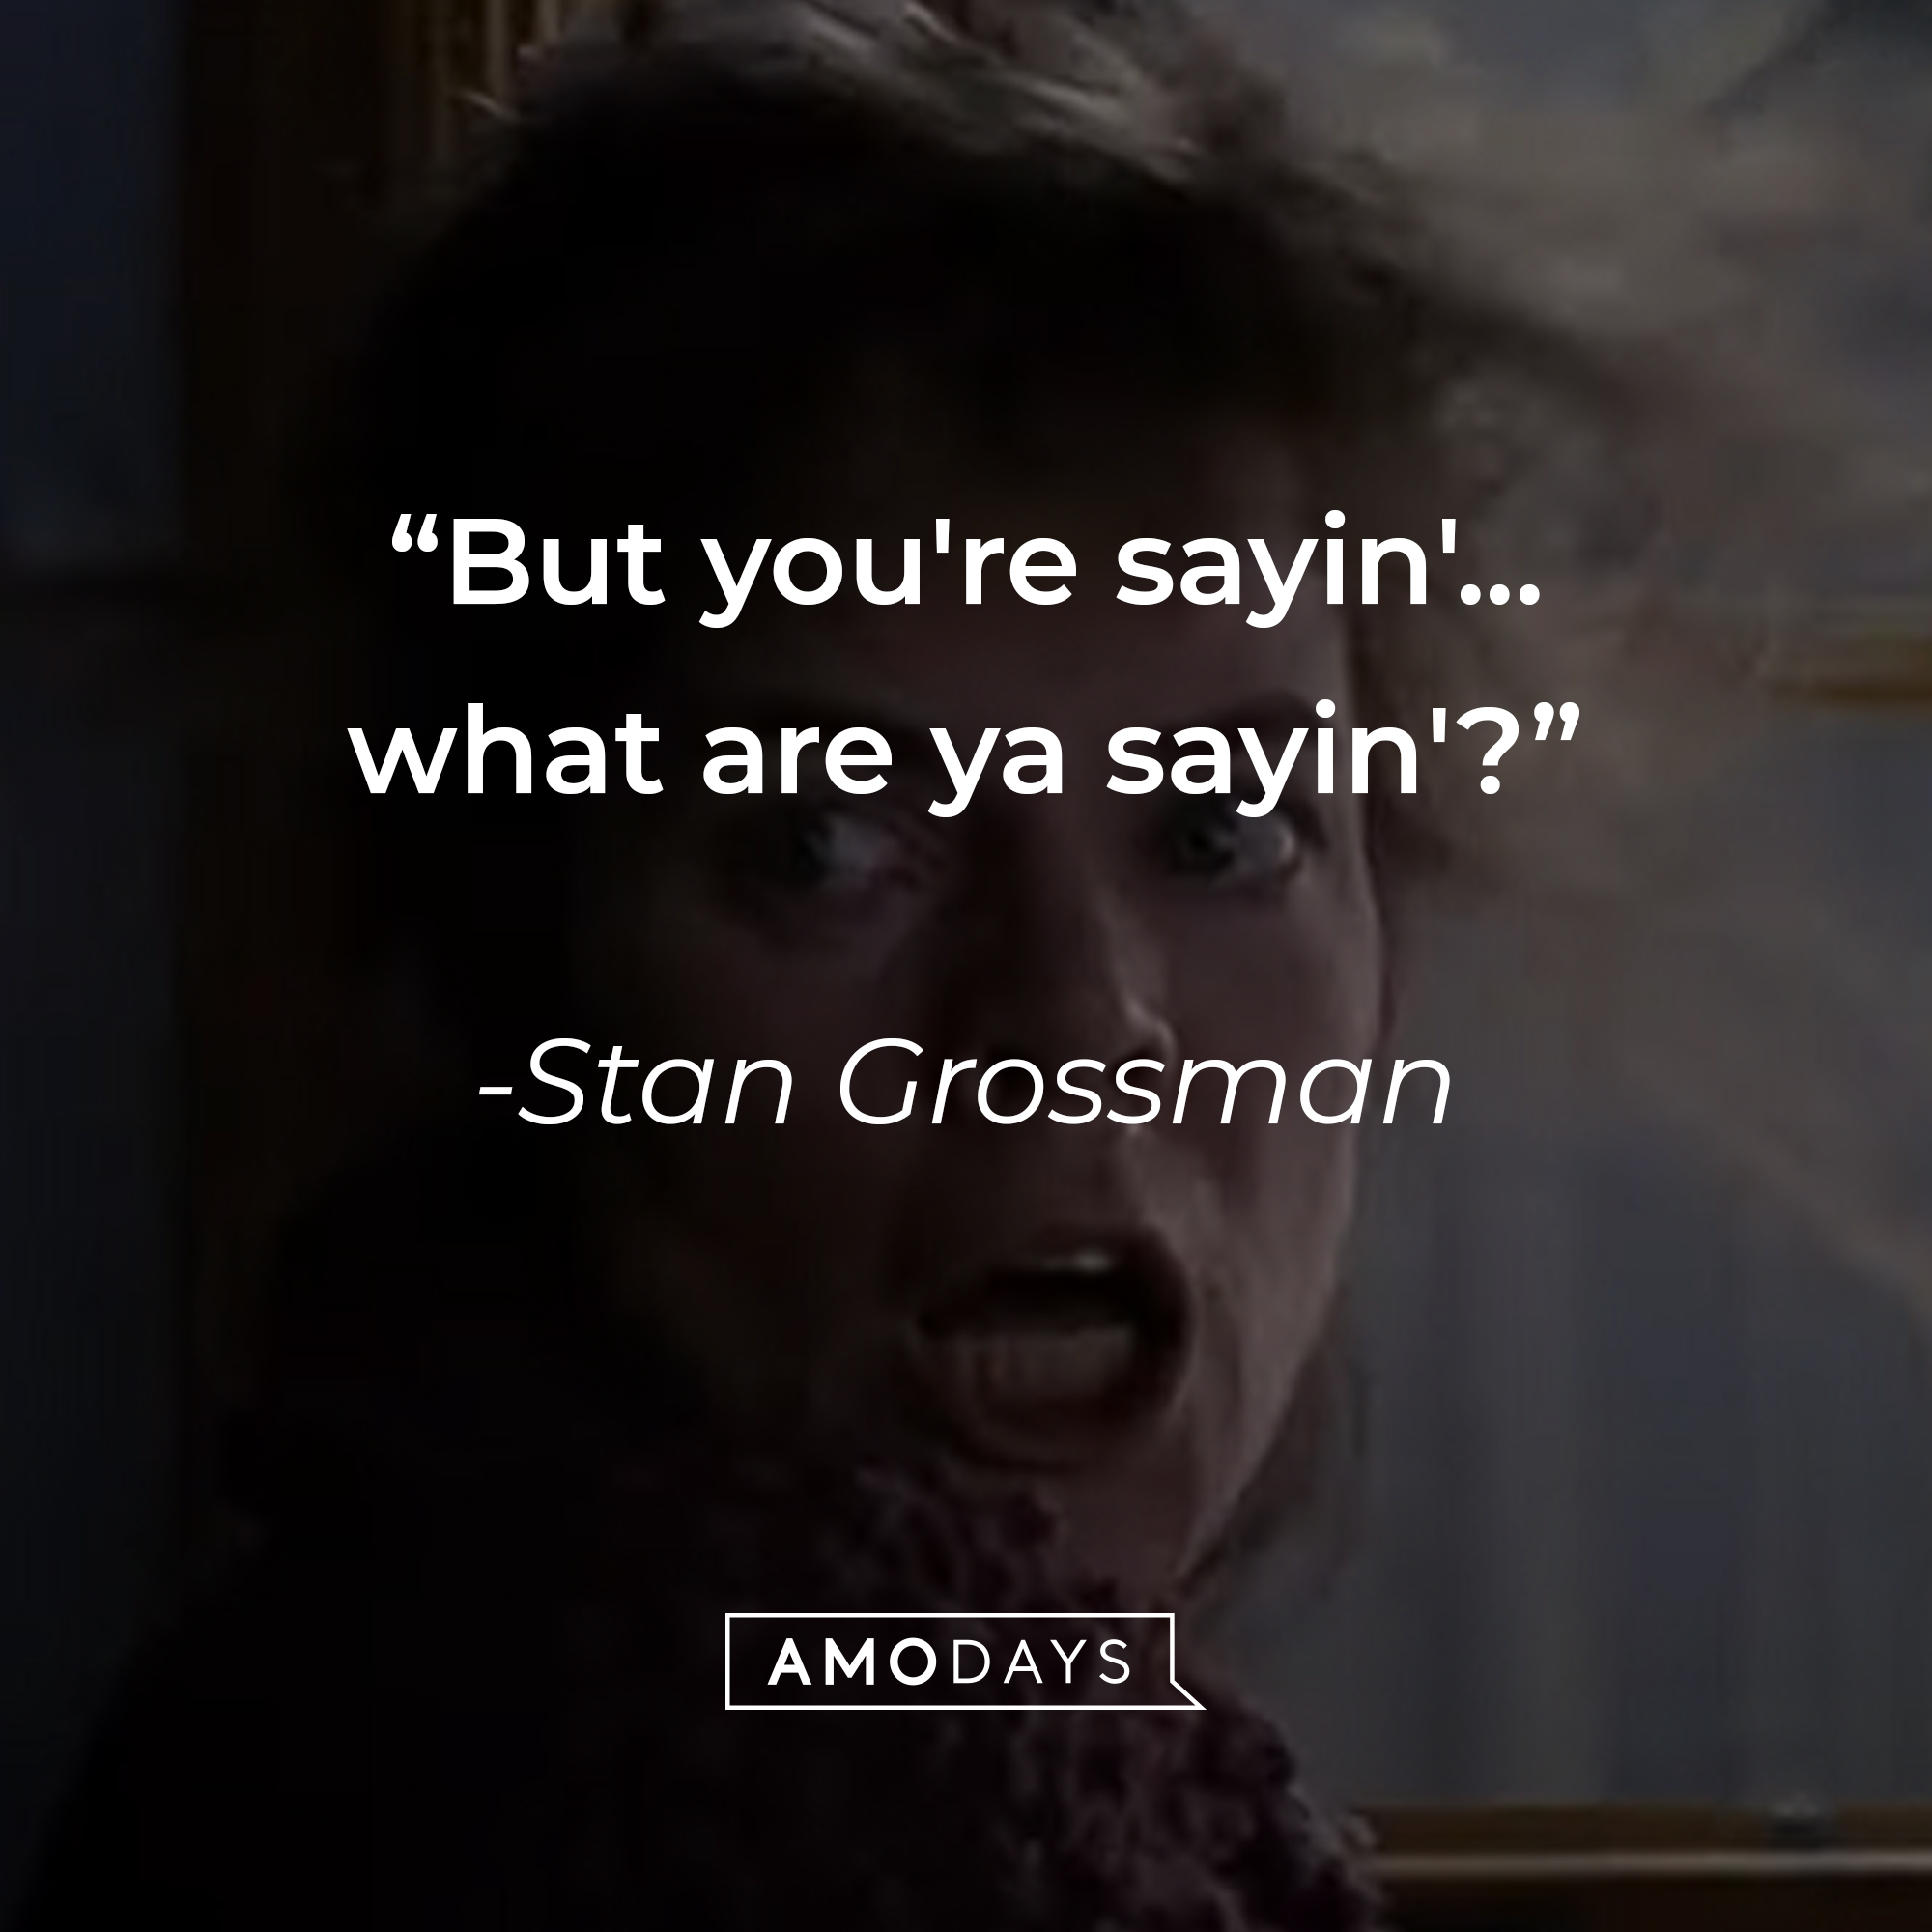 Stan Grossman's quote: "But you're sayin'... what are ya sayin'?" | Source: youtube.com/MGMStudios